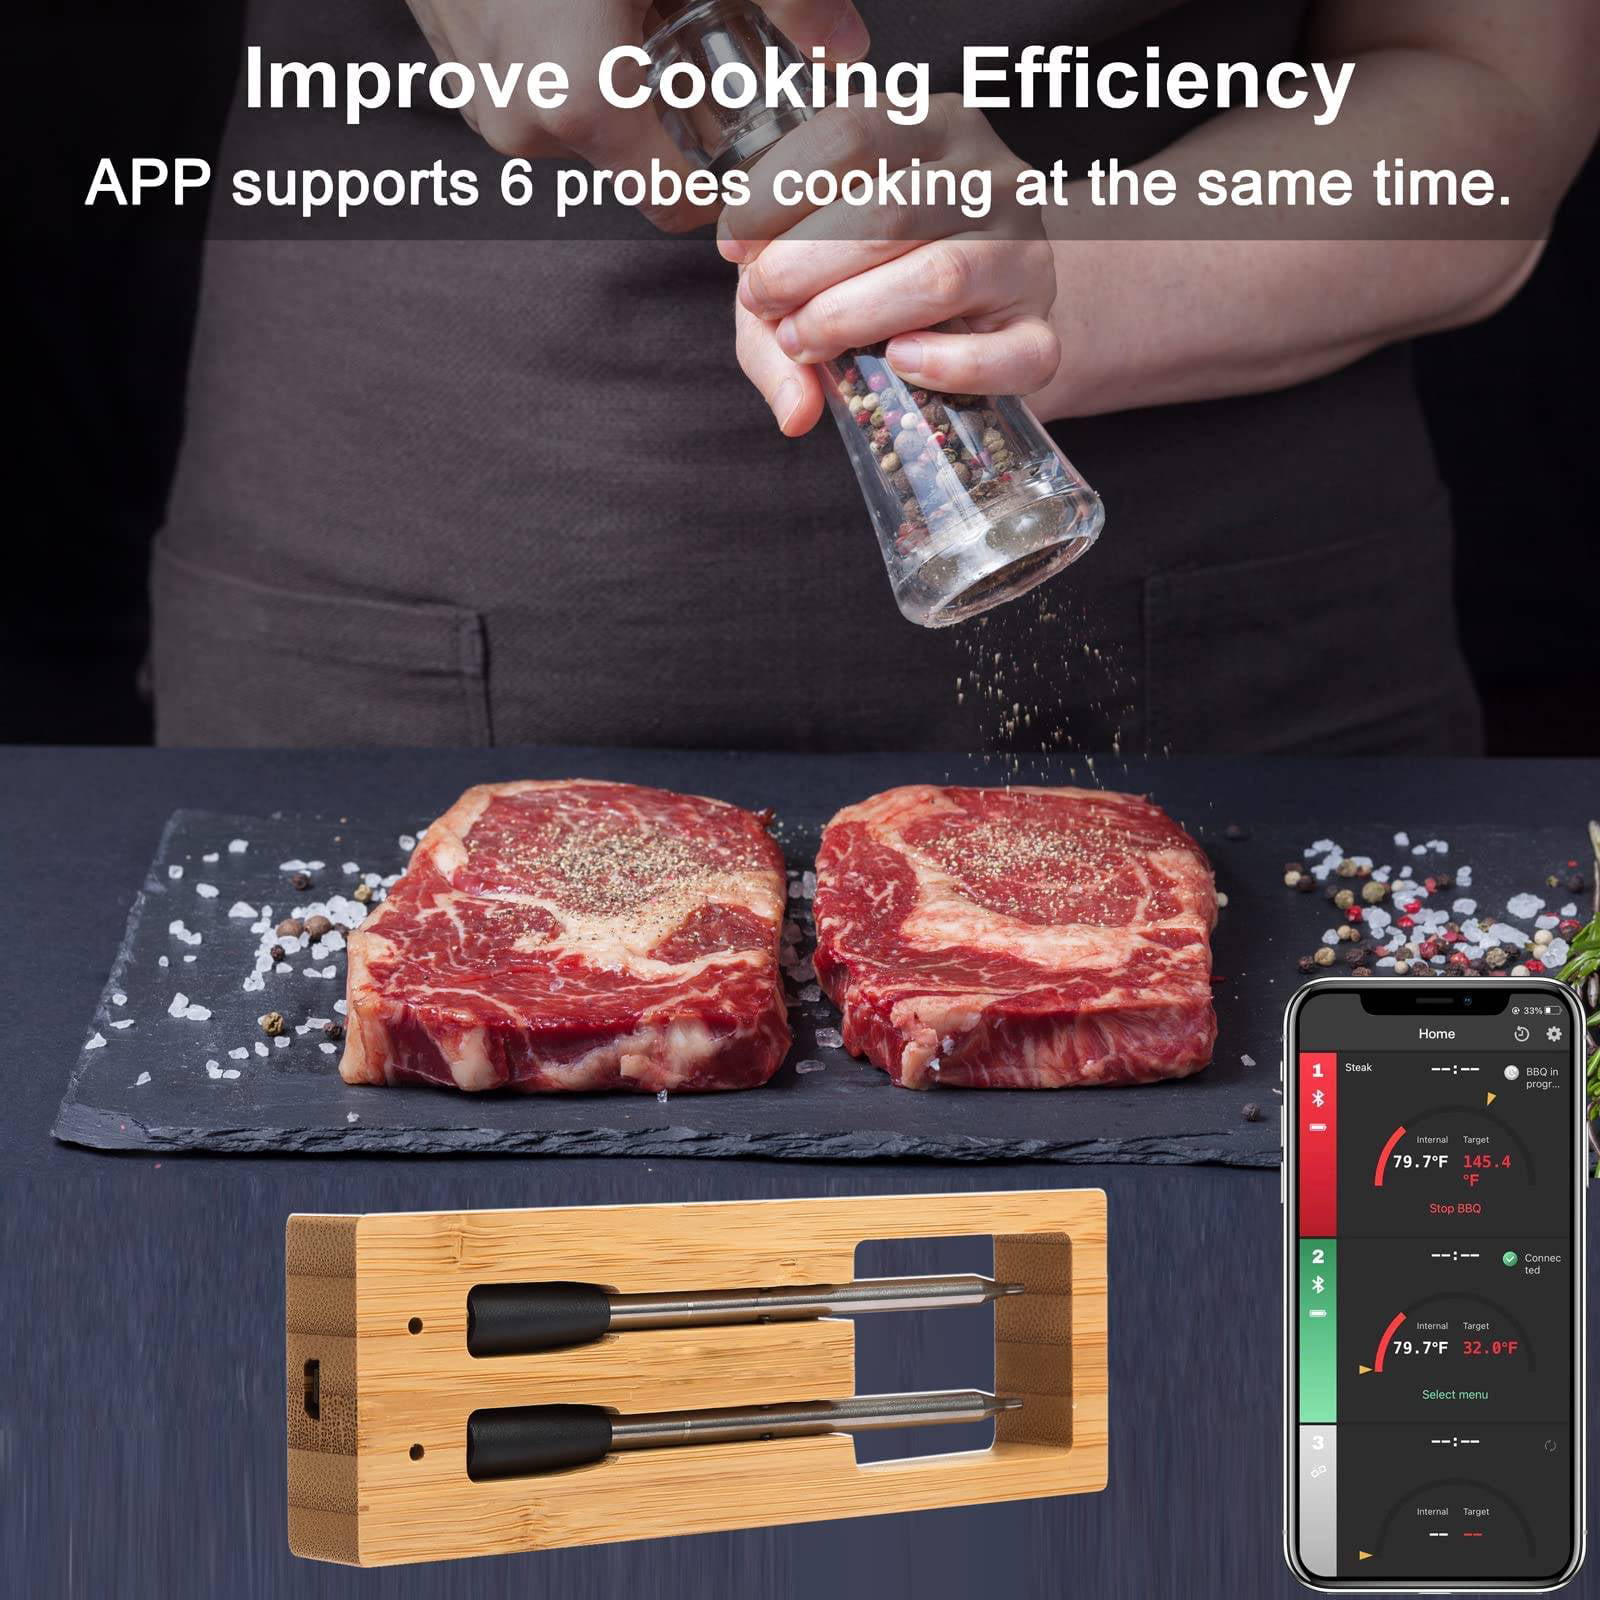 THE-387 Smart Bluetooth Meat Thermometer 500FT Wireless Range for